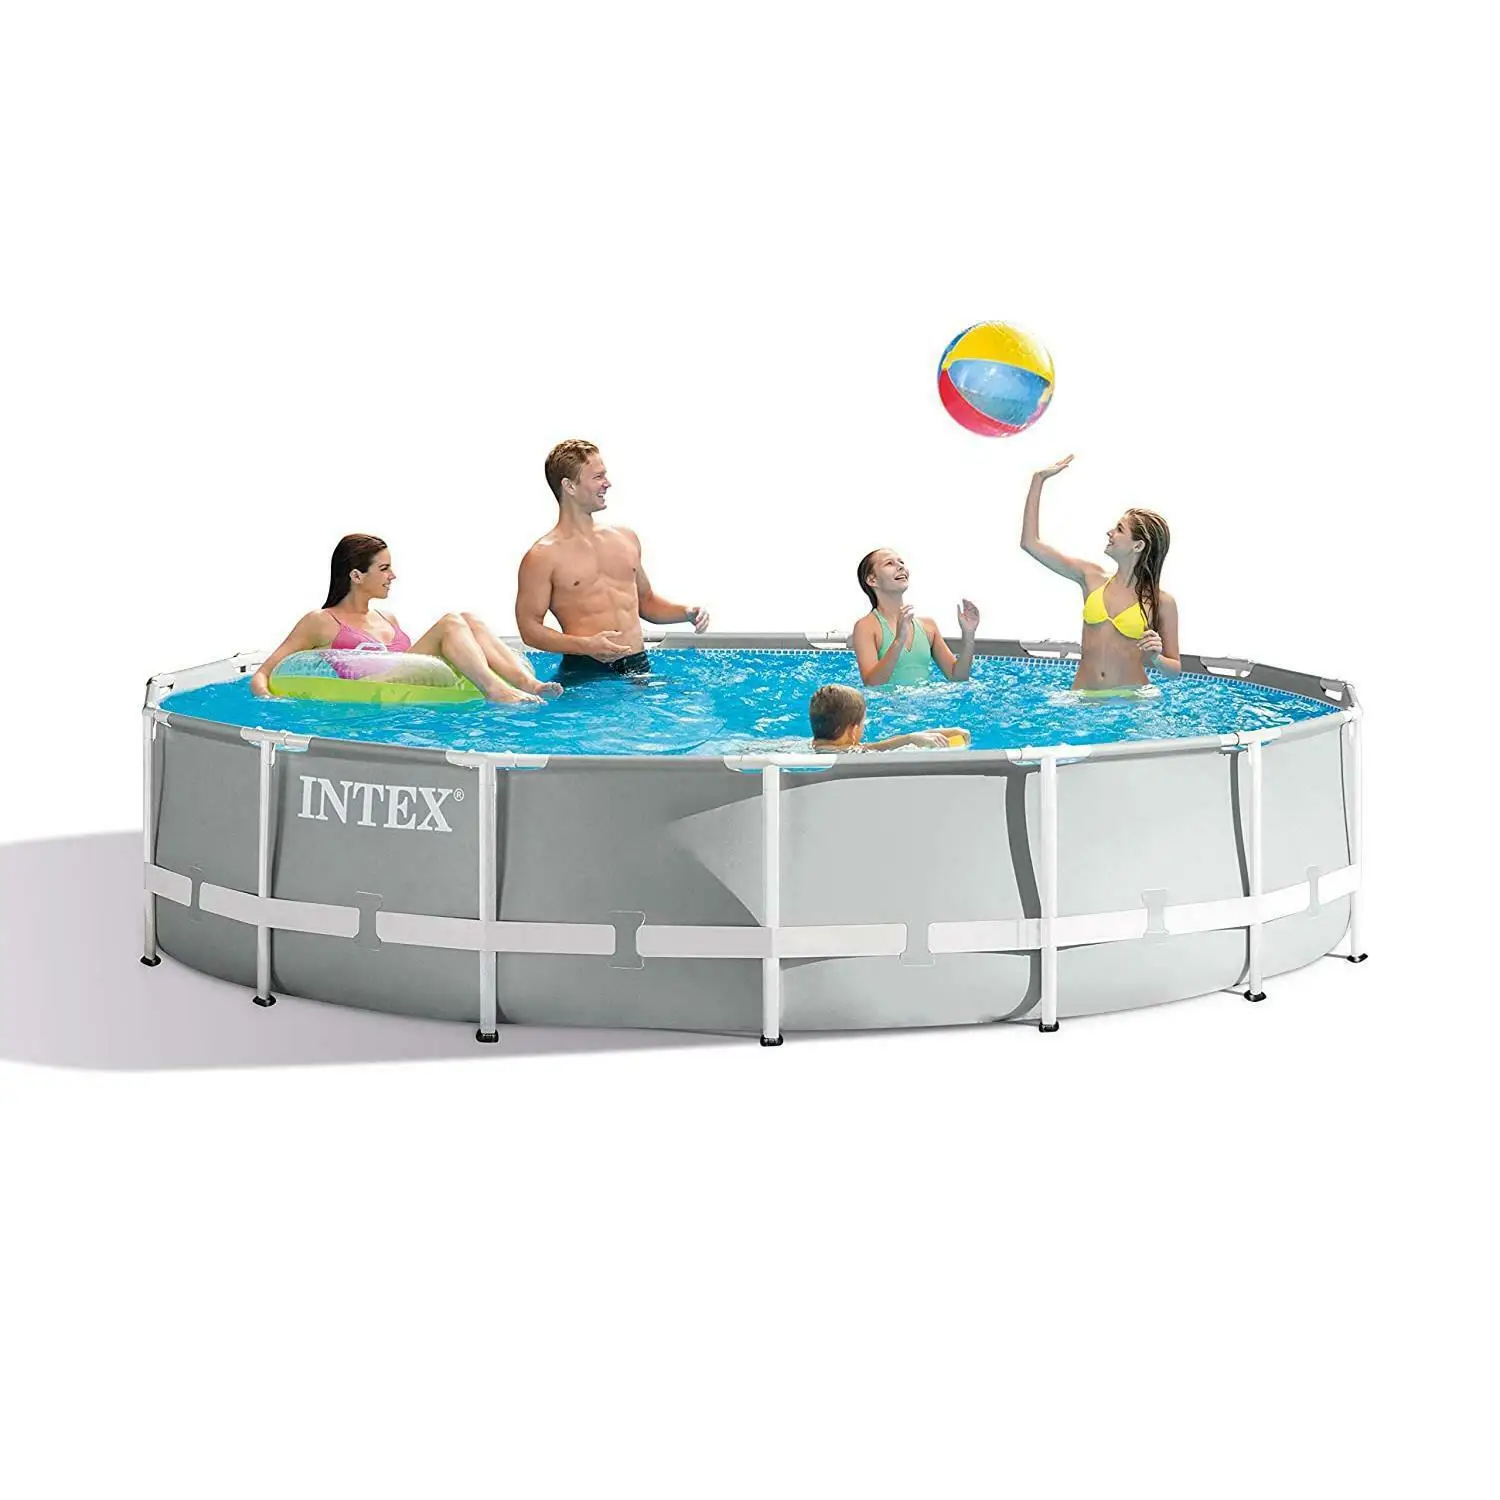 

Intex Pools Swimming Outdoor 26710 12FT X 30IN PRISM FRAME PREMIUM POOL Above Ground Pool & Accessories Included